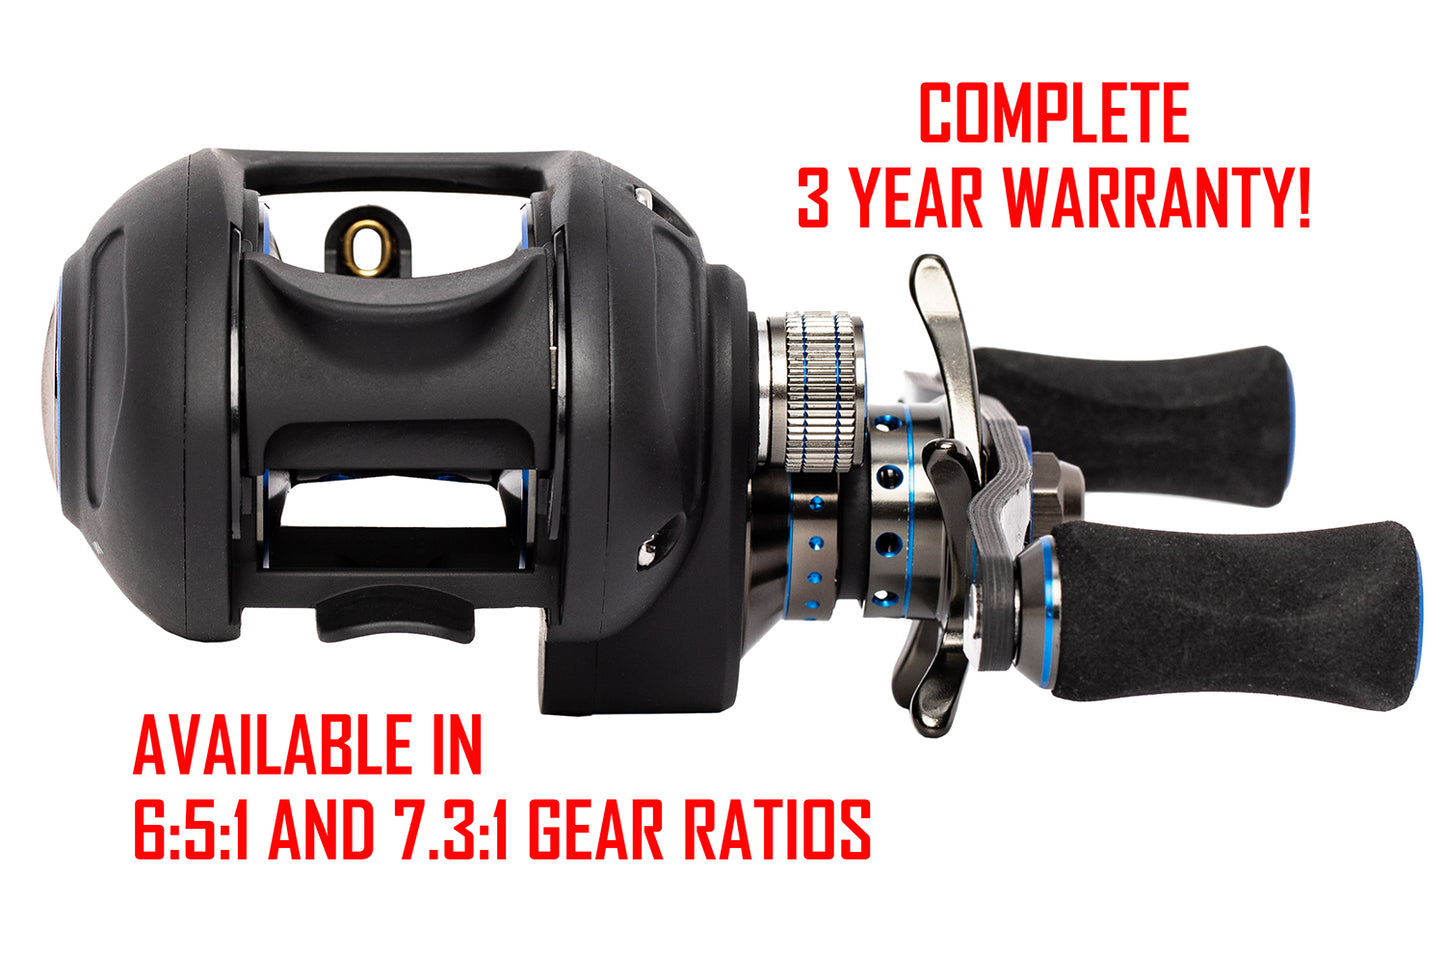 Black with blue APEX ELITE Baitcaster with red text. text: COMPLETE 3 YEAR WARRANTY! AVAILABLE IN 6:5:1 AND 7.3:1 GEAR RATIOS